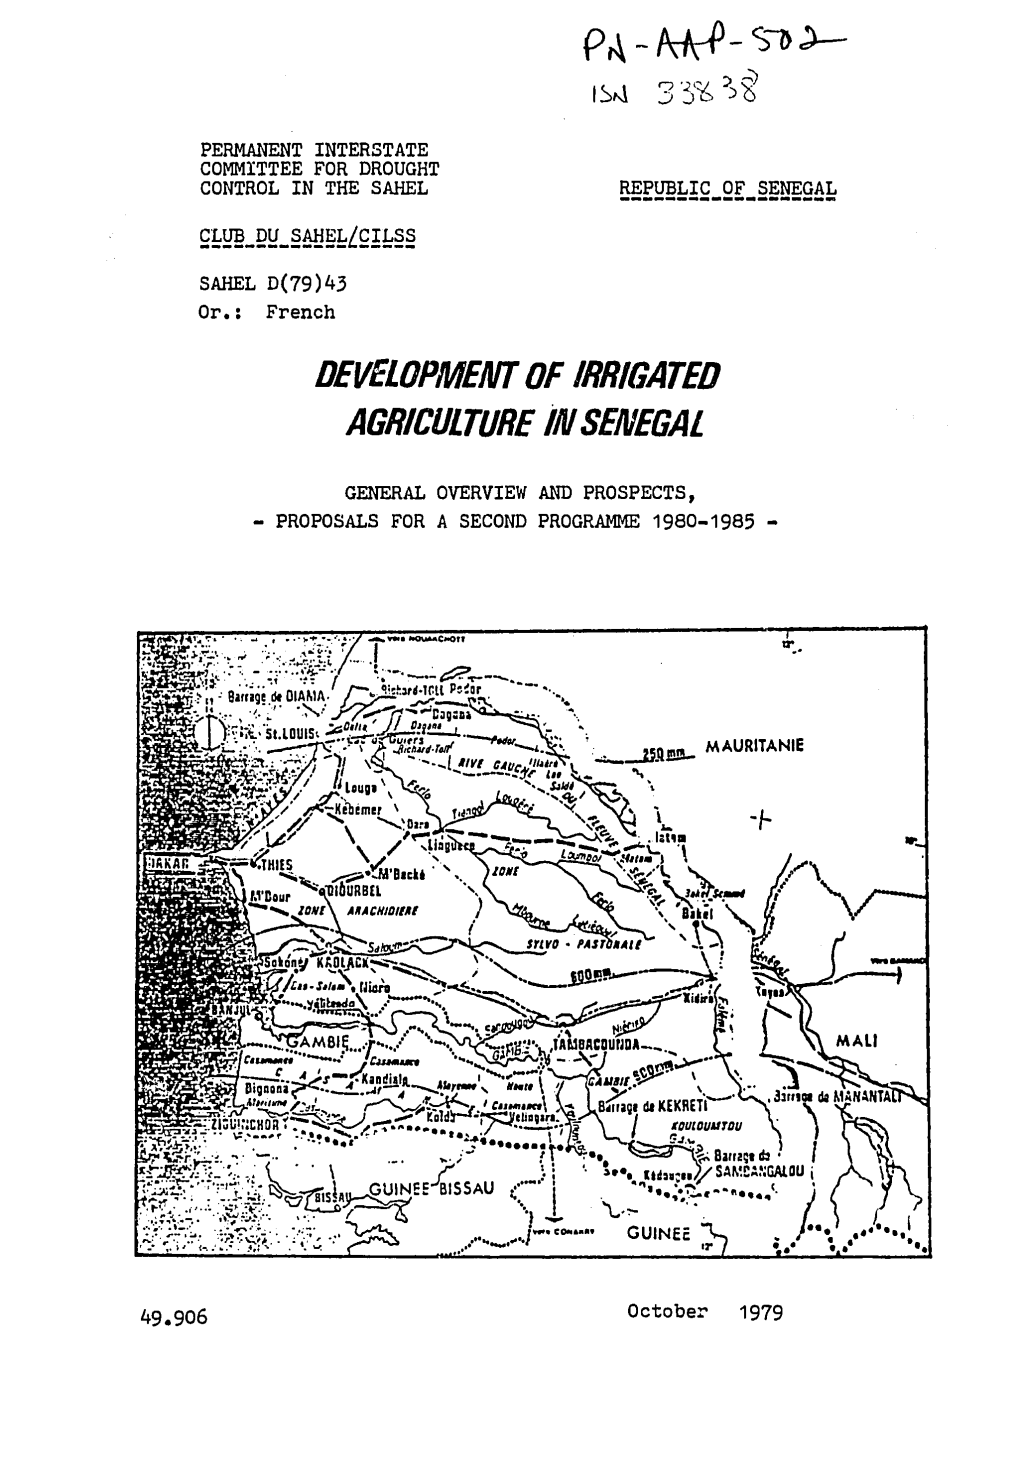 Development of Irrigated Agriculture in Senegal